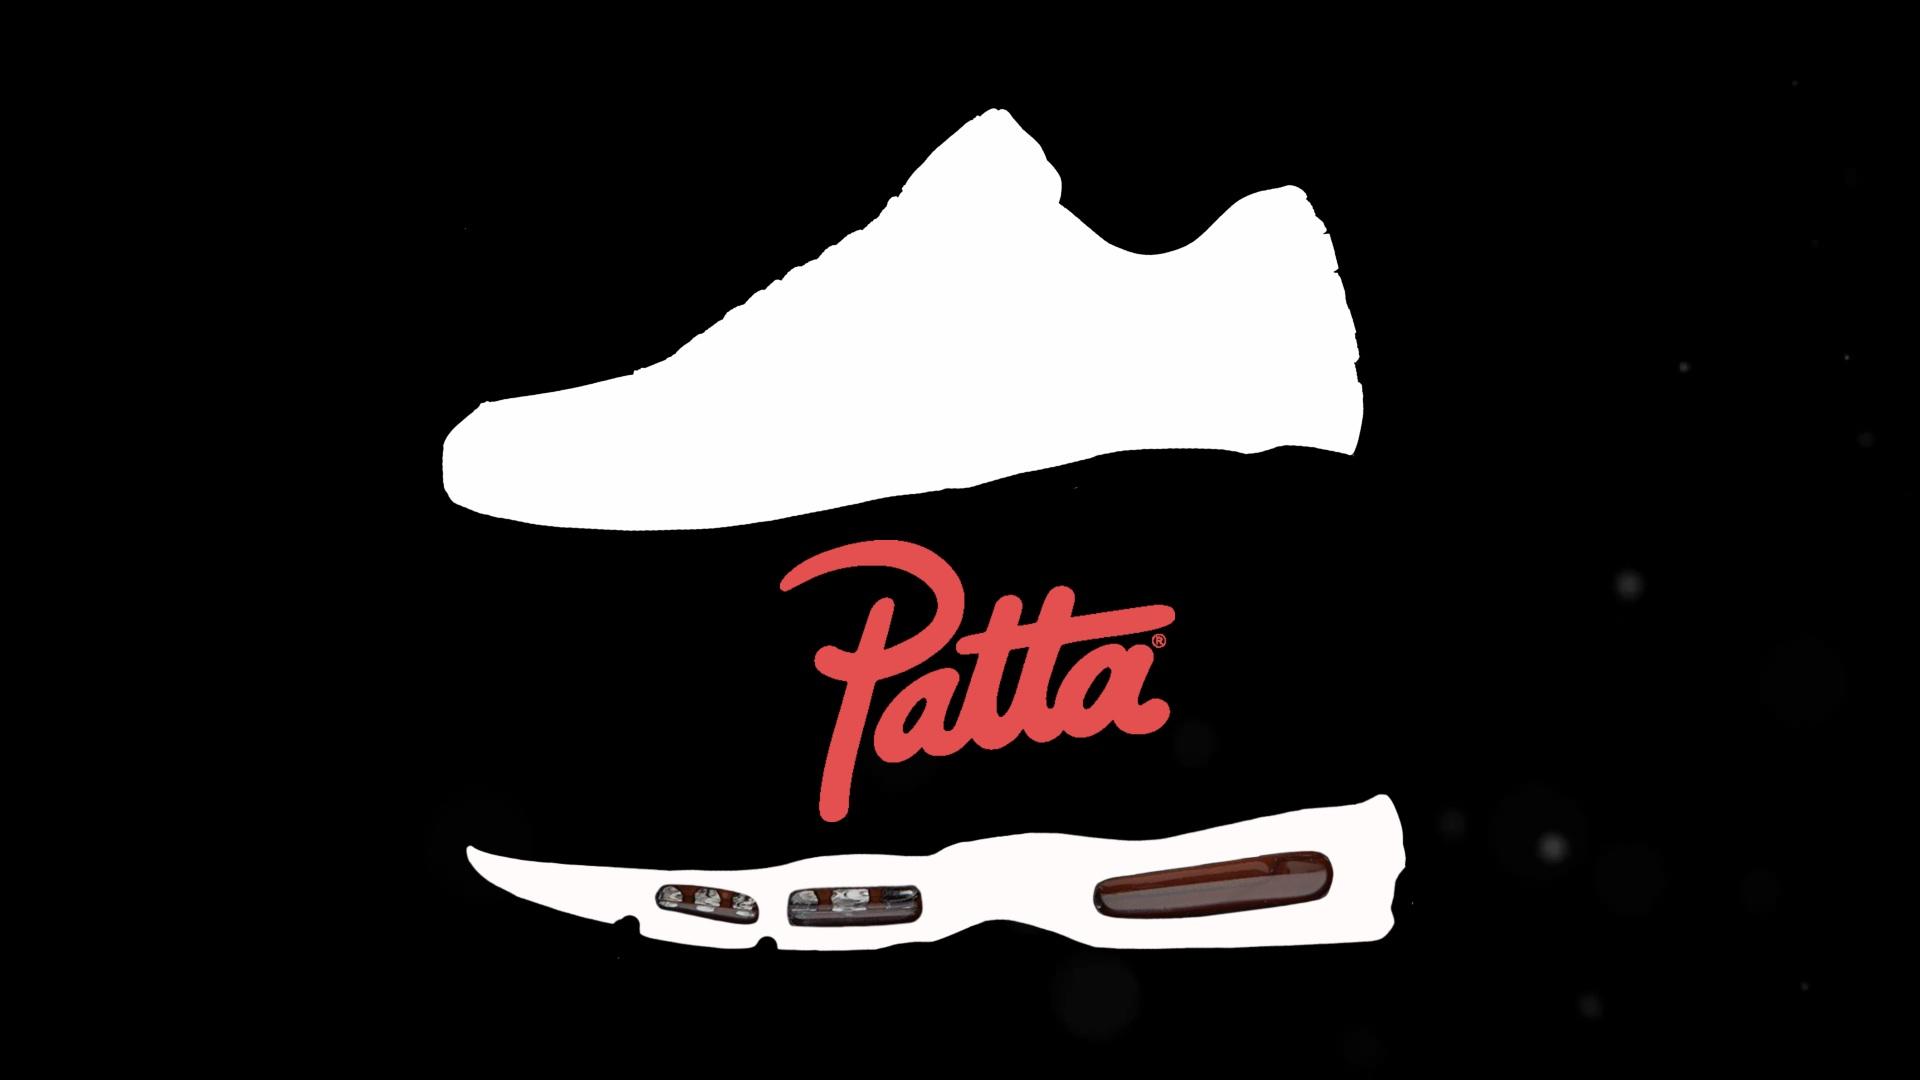 The Next Patta X Nike Collaboration Features A Sole Swapped